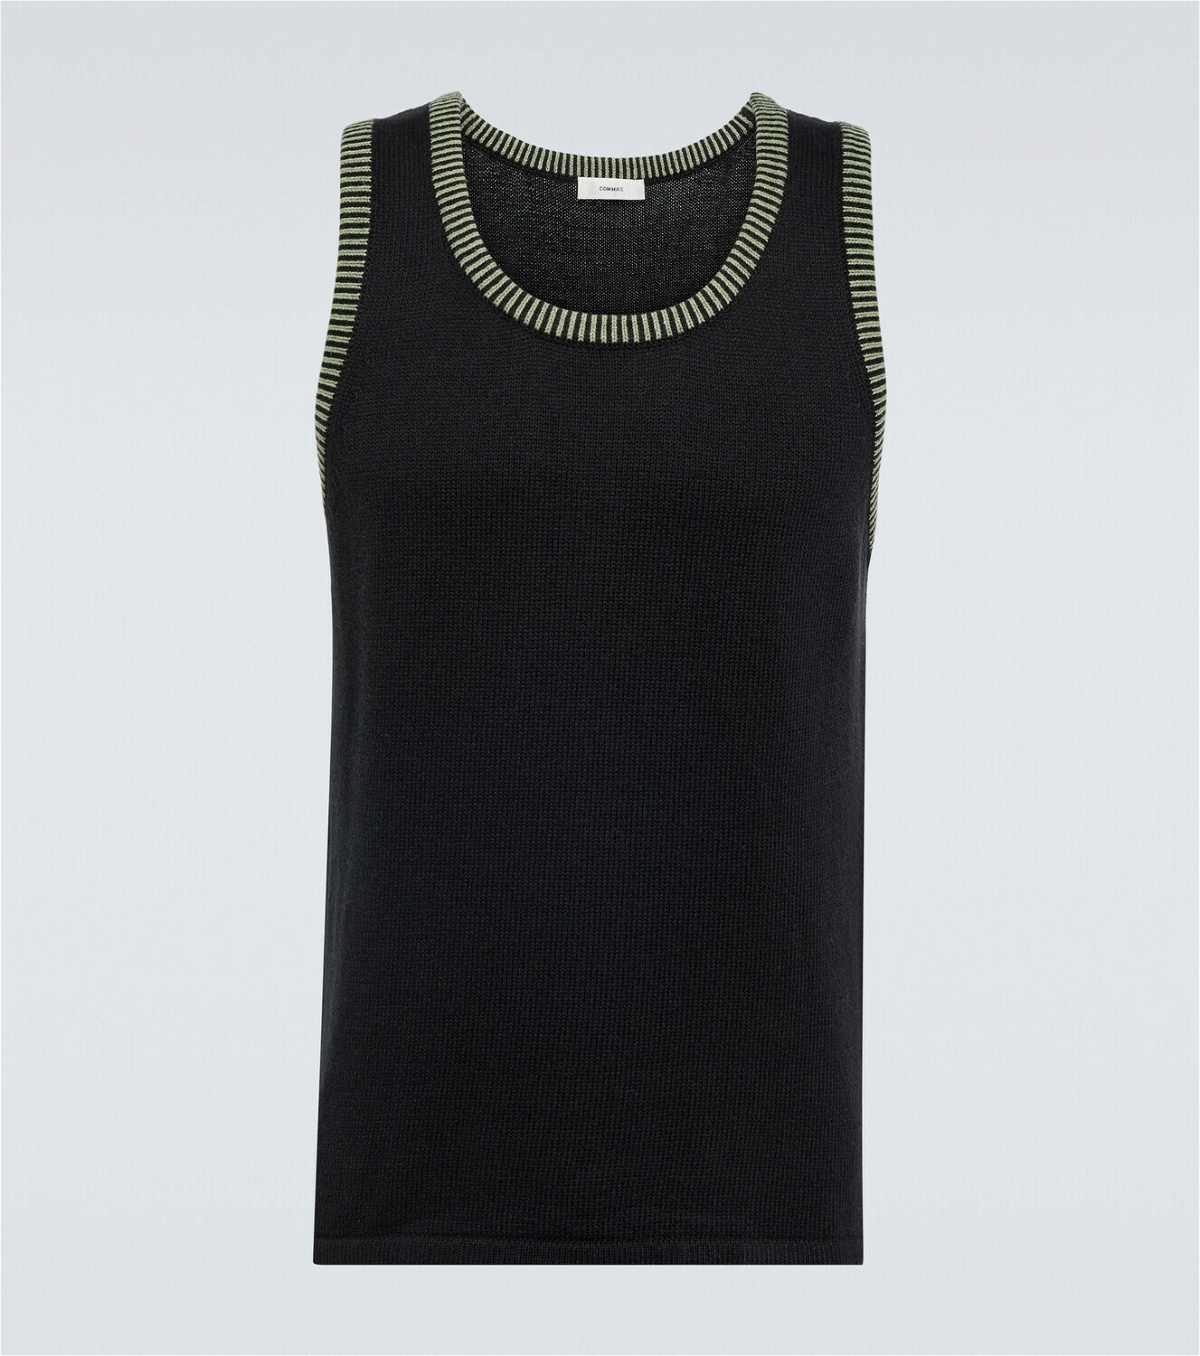 Commas Sleeveless knitted top